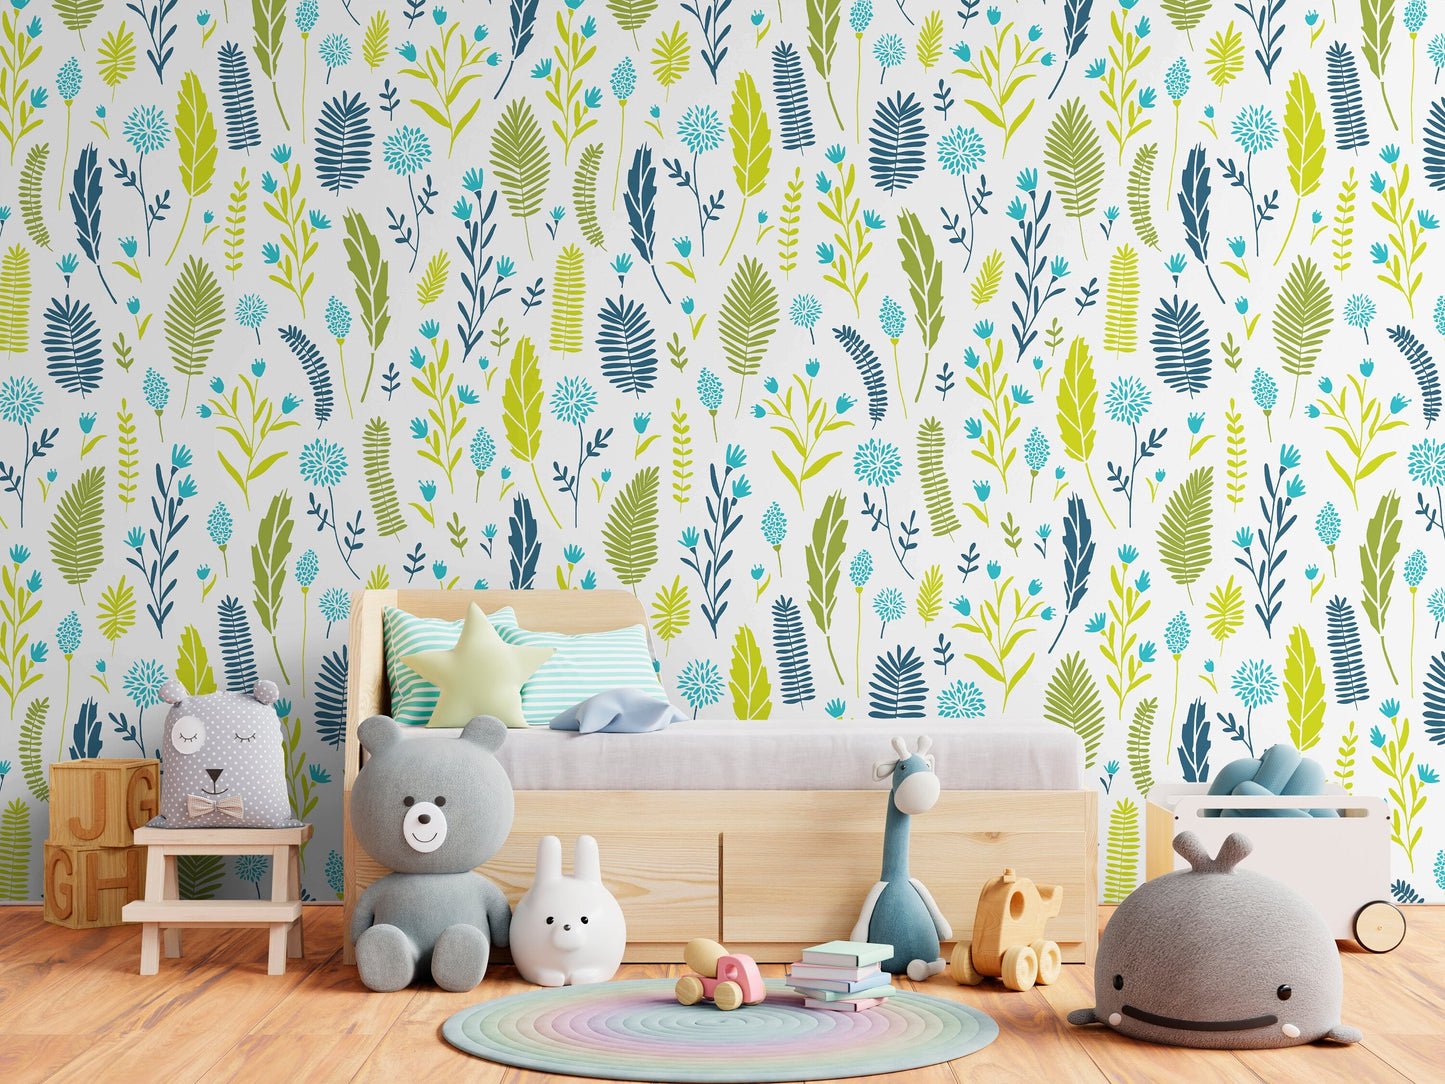 Removable Wallpaper, Plants Wall, Peel and Stick Wallpaper, Removable Wallpaper, Wall Paper Removable, Wallpaper - A879